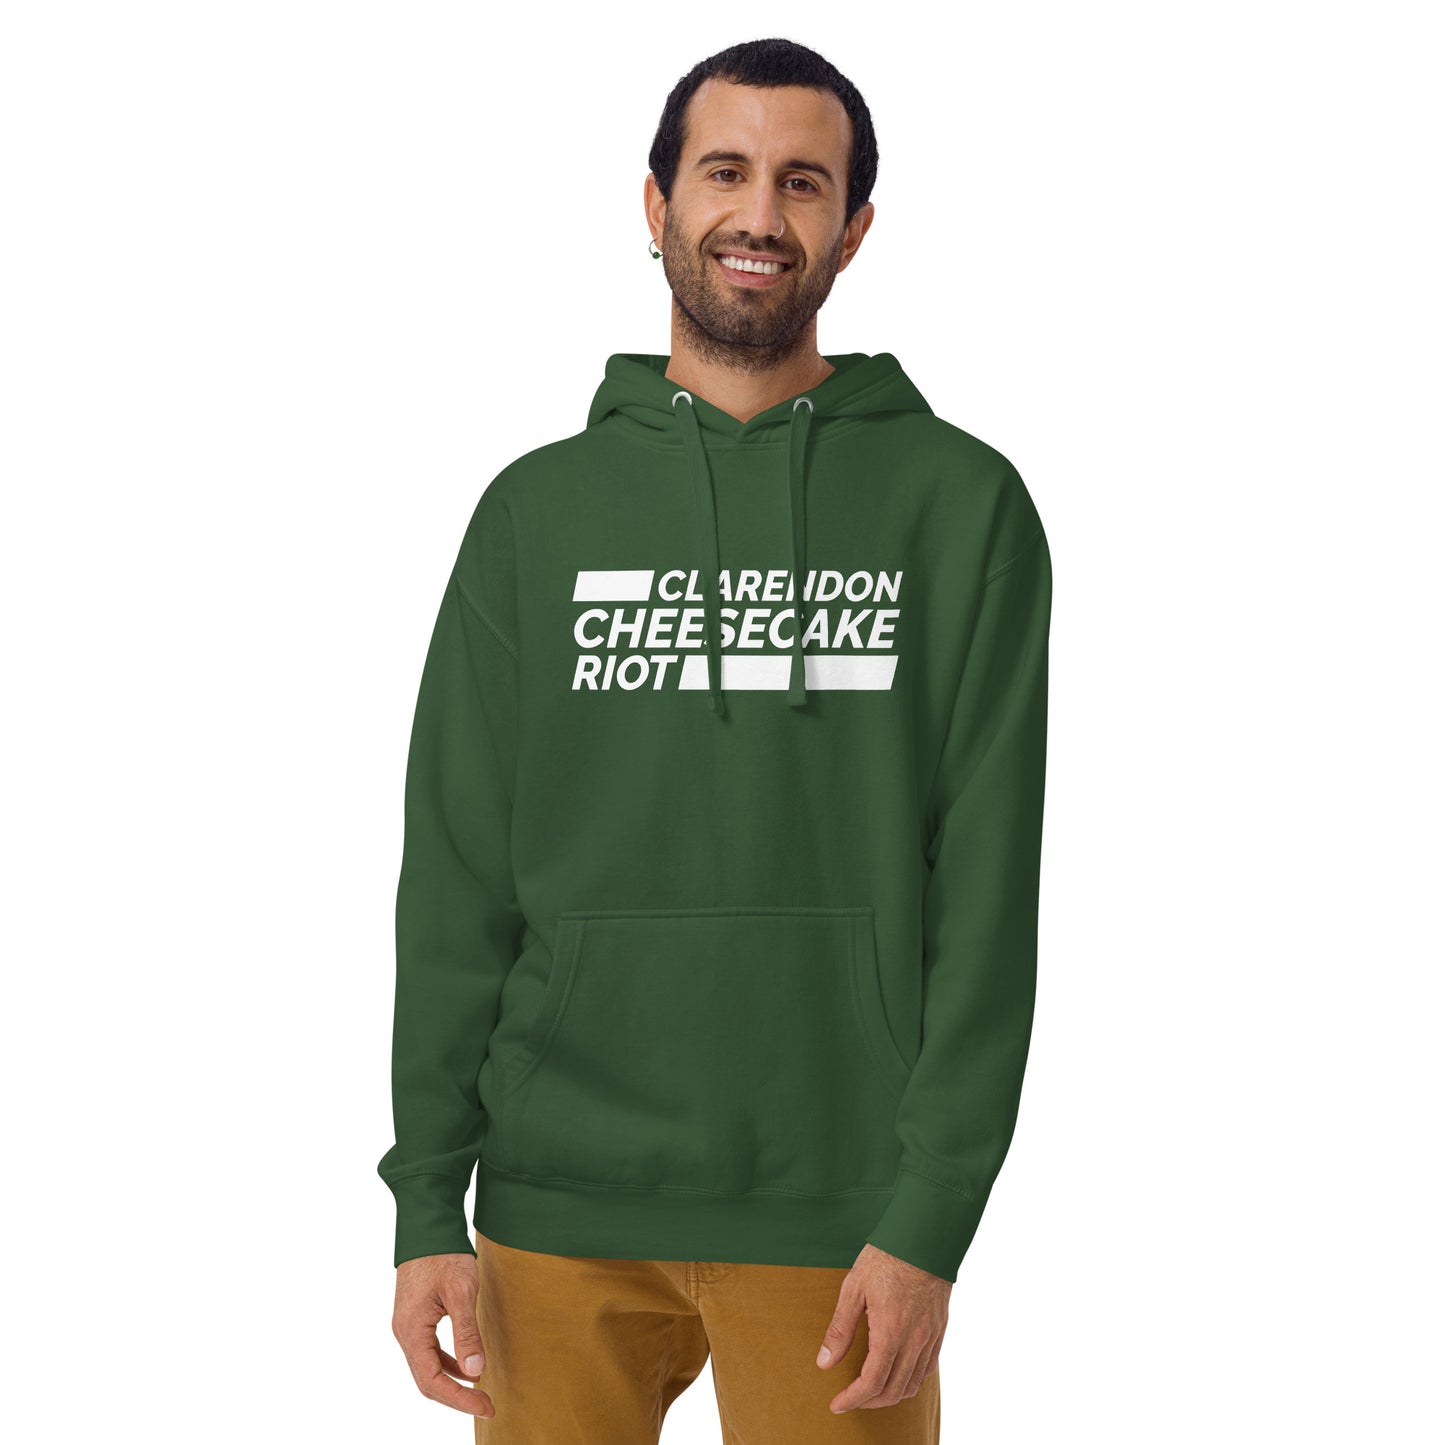 Clarendon Cheesecake Riot hoodie